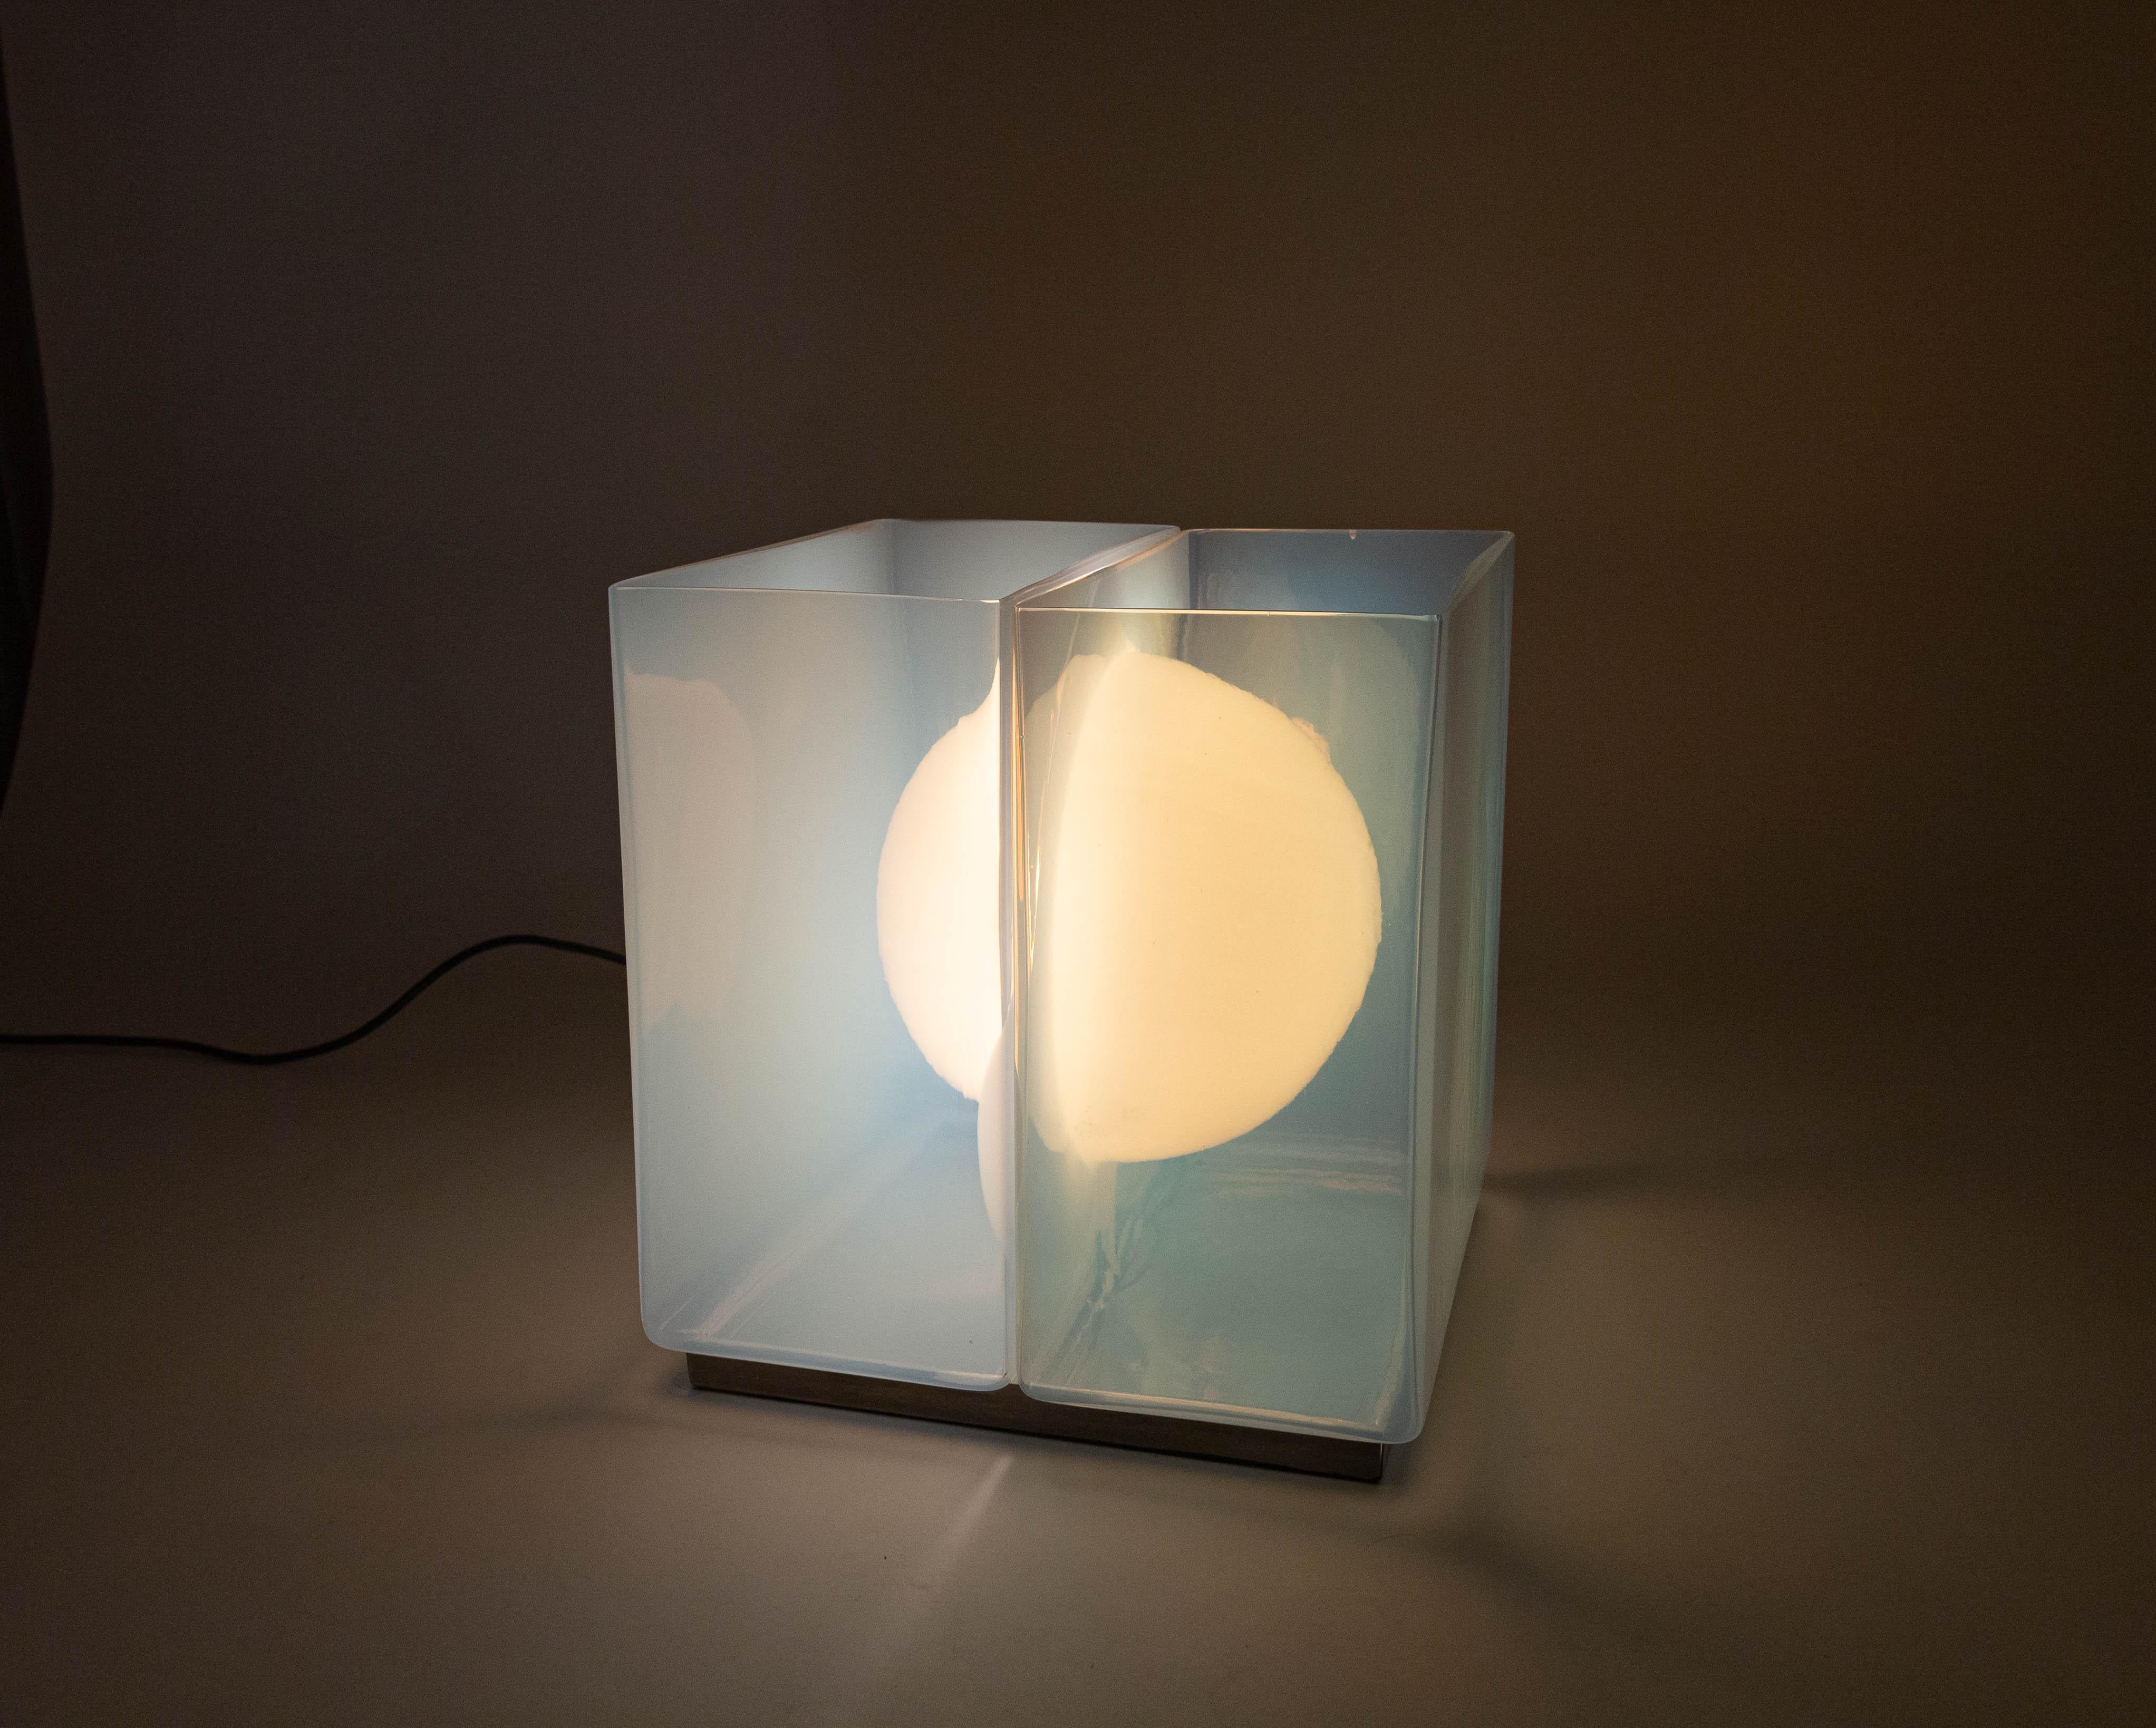 Model LT 323 Table lamp designed by Carlo Nason and manufactured by A.V. Mazzega in the 1960s.

The ingenious hand blown- object consists of two symmetrical opaline glass halves, one central light bulb and a square metal support base. The halves are